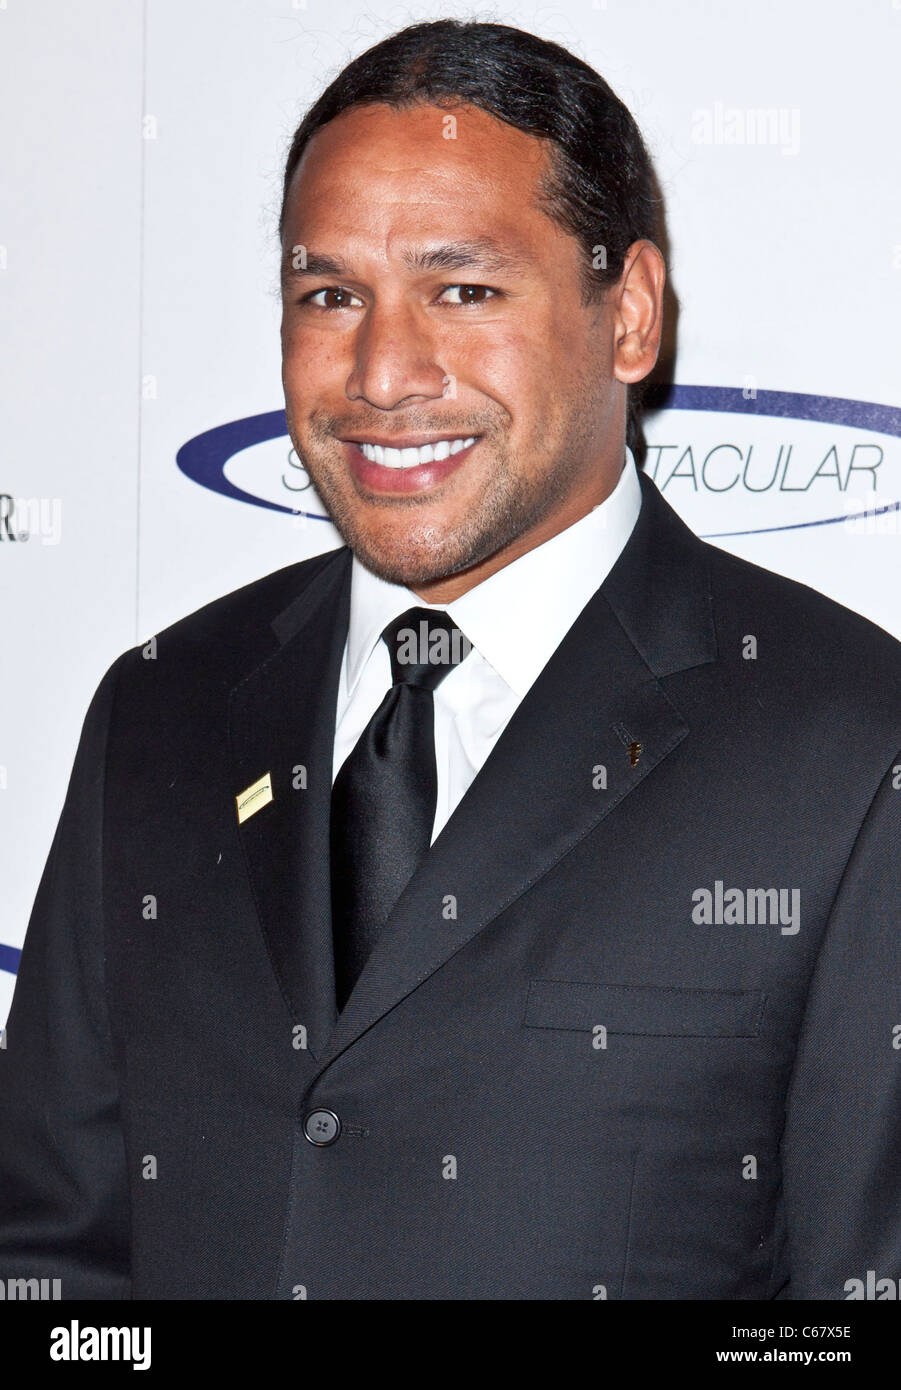 Troy Polamalu at arrivals for 26th Anniversary Sports Spectacular, Hyatt Regency Century Plaza Hotel, Los Angeles, CA May 22, 2011. Photo By: Emiley Schweich/Everett Collection Stock Photo